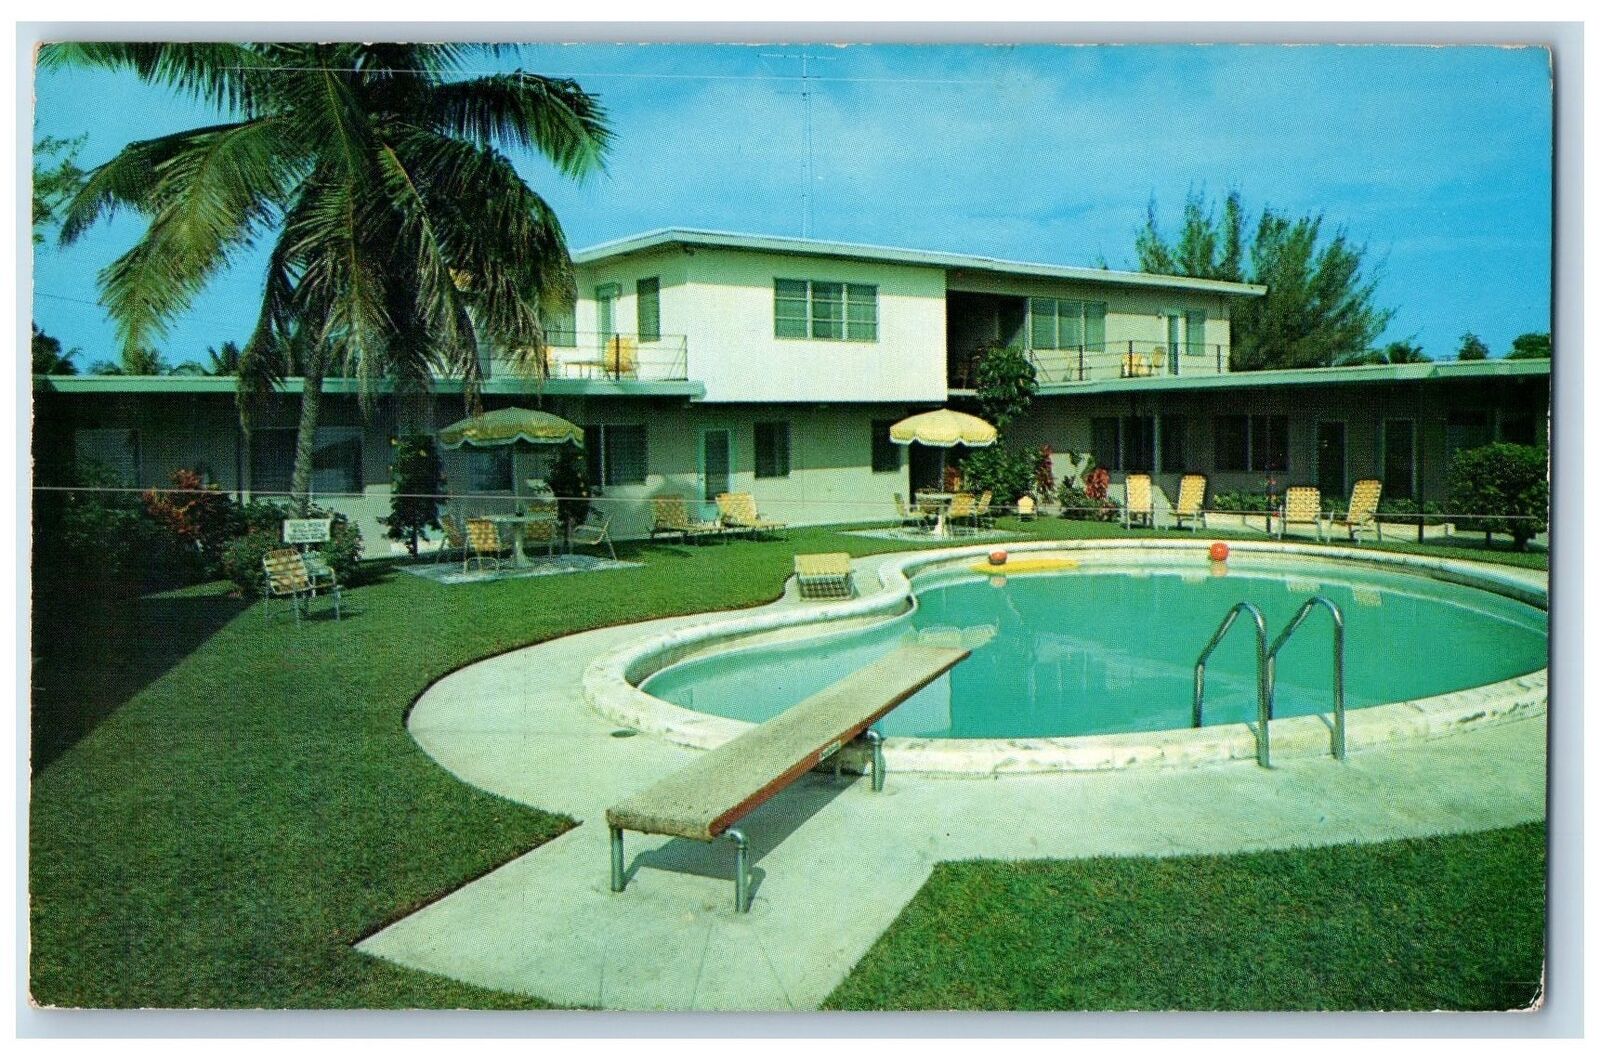 Fort Myers Florida FL Postcard Areca Palms Apartments View c1960's Swimming Pool